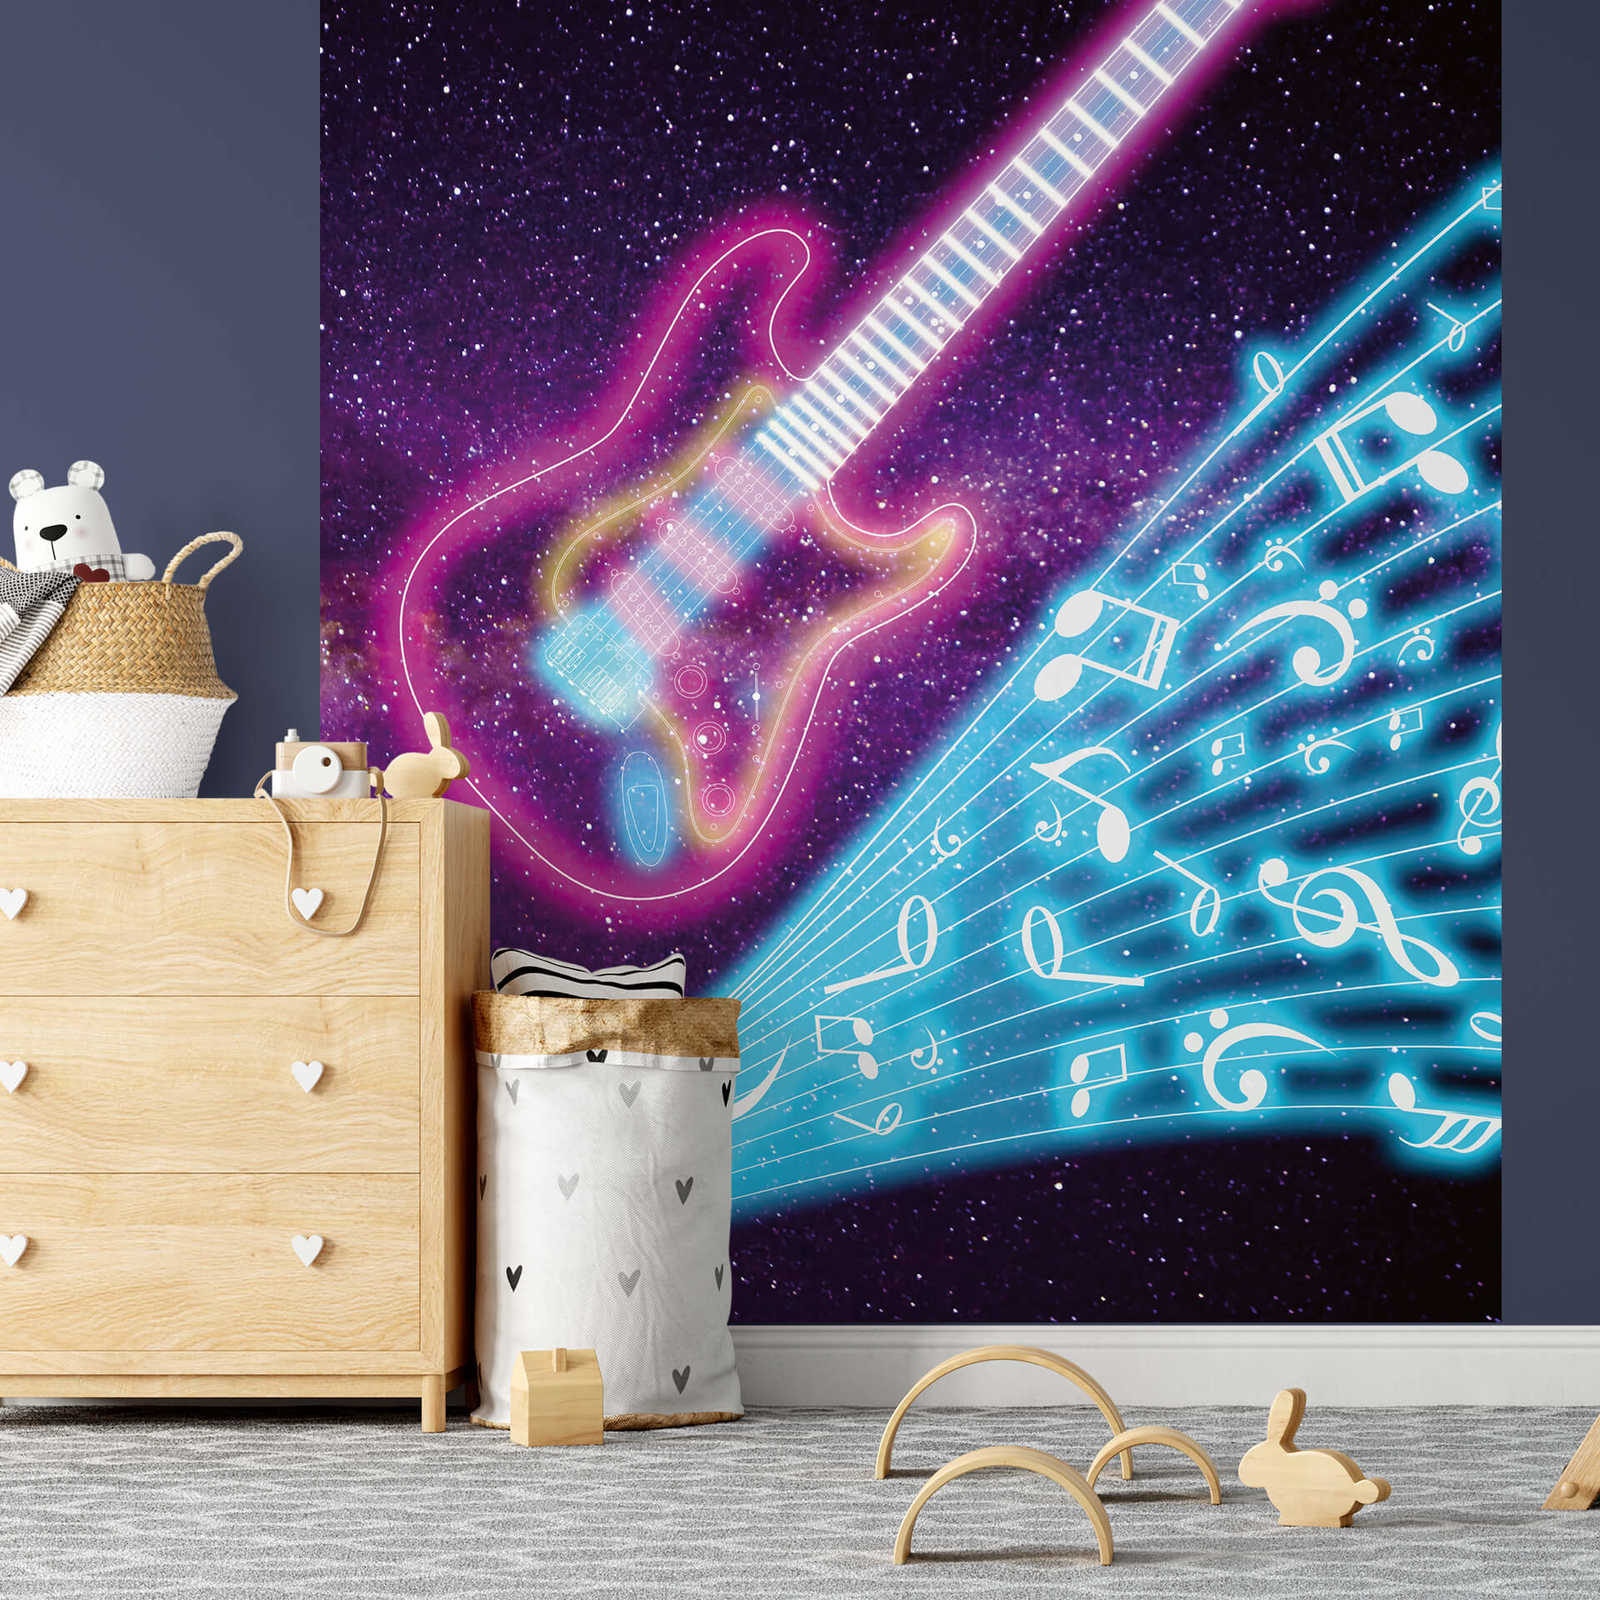             Music mural with neon design & space background
        